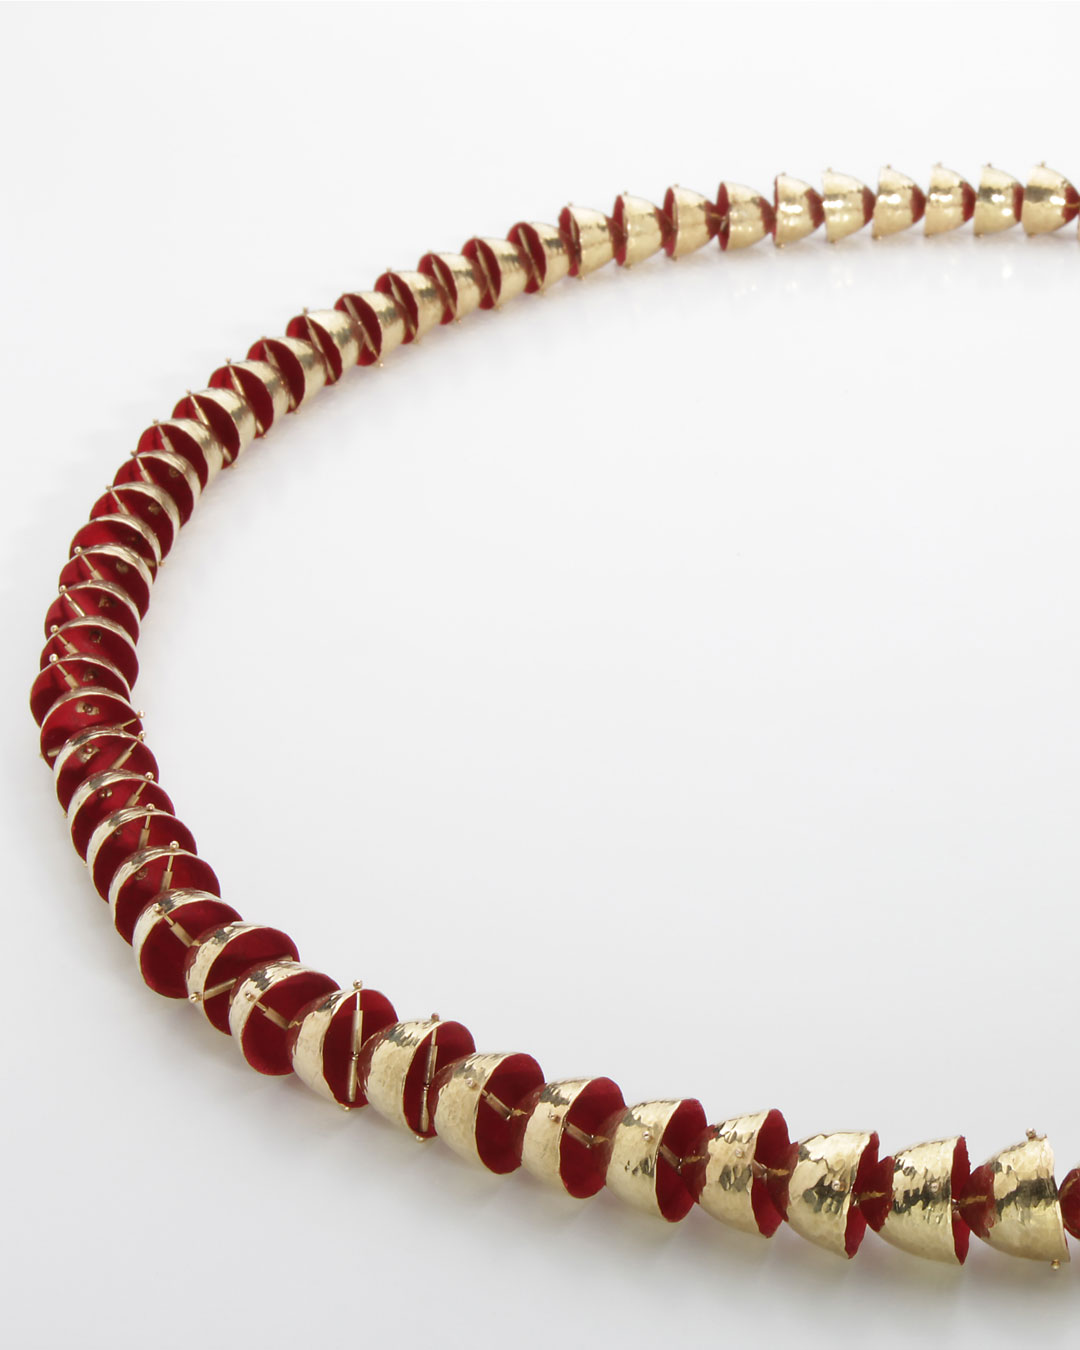 Piergiuliano Reveane, untitled, 2018, necklace; gold, enamel, ø 895 x 14 mm, price on request (image 2/3)